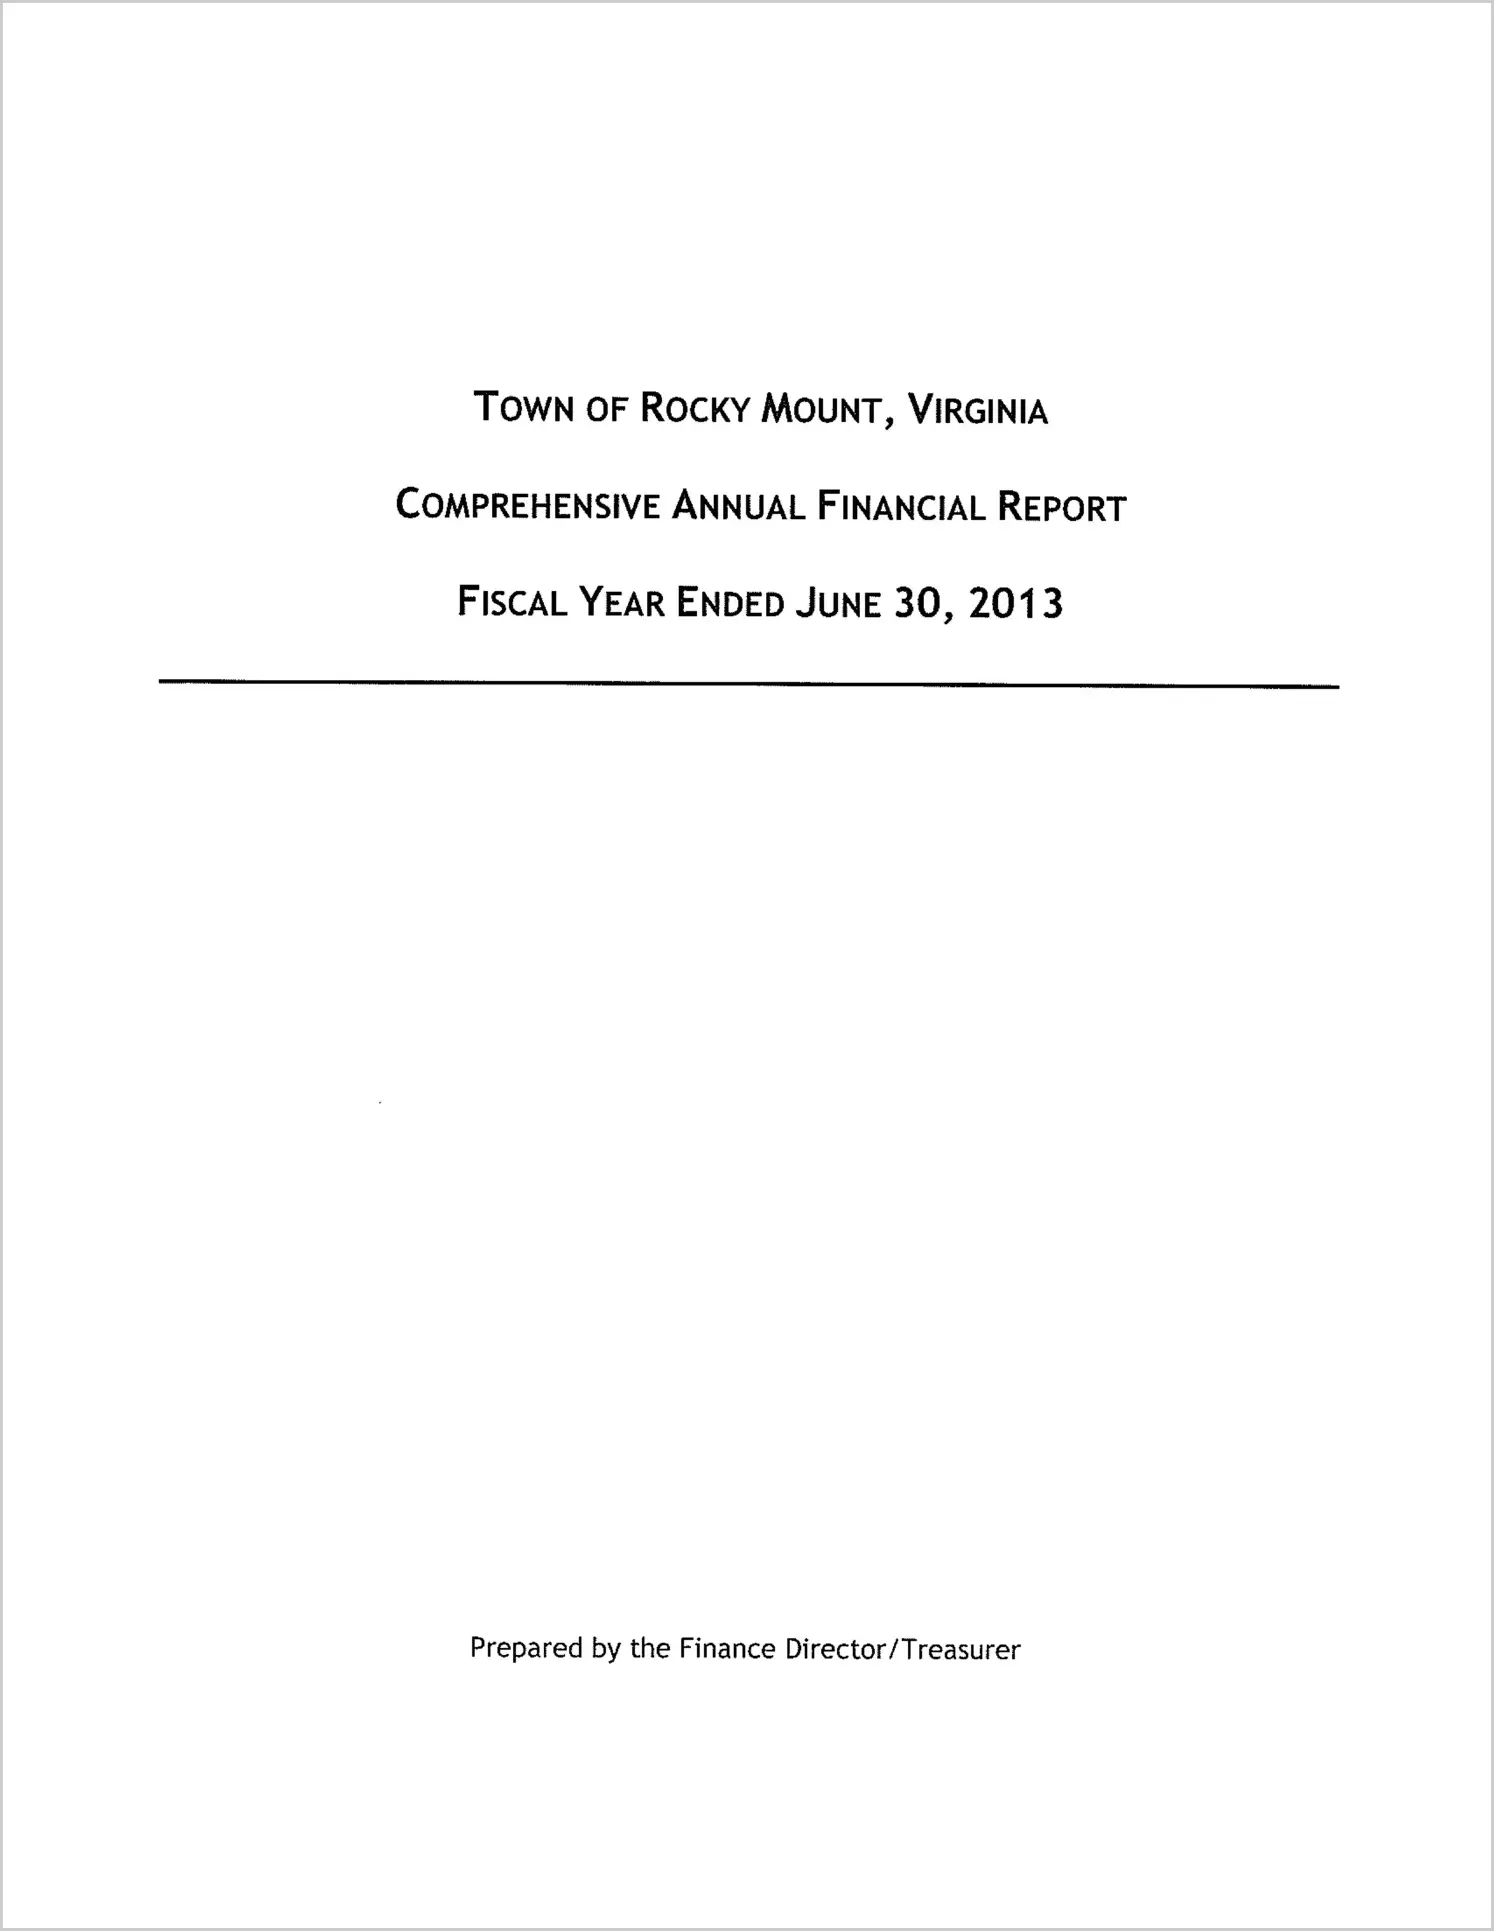 2013 Annual Financial Report for Town of Rocky Mount